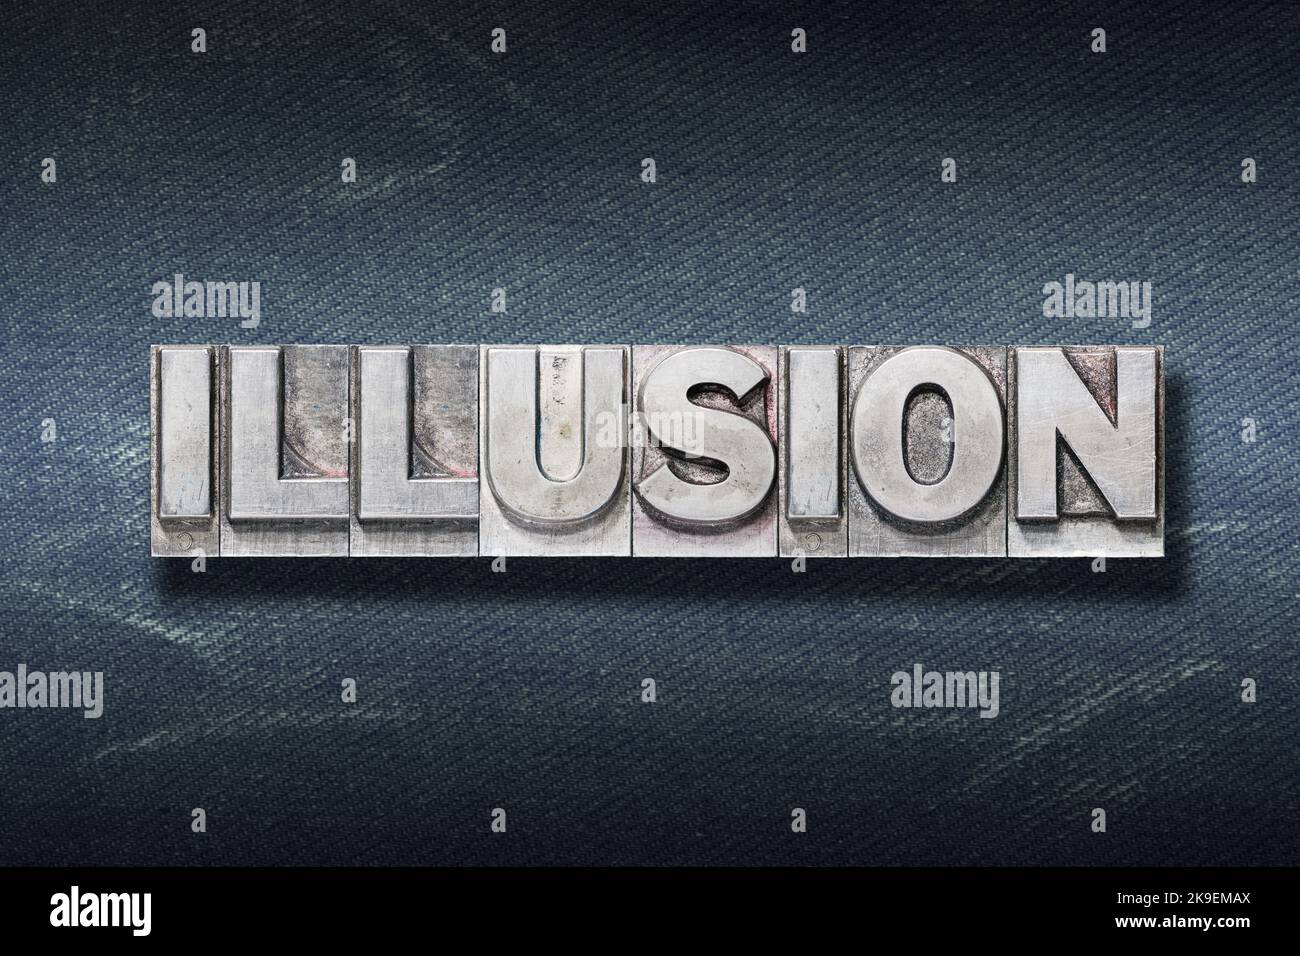 illusion word made from metallic letterpress on dark jeans background Stock Photo